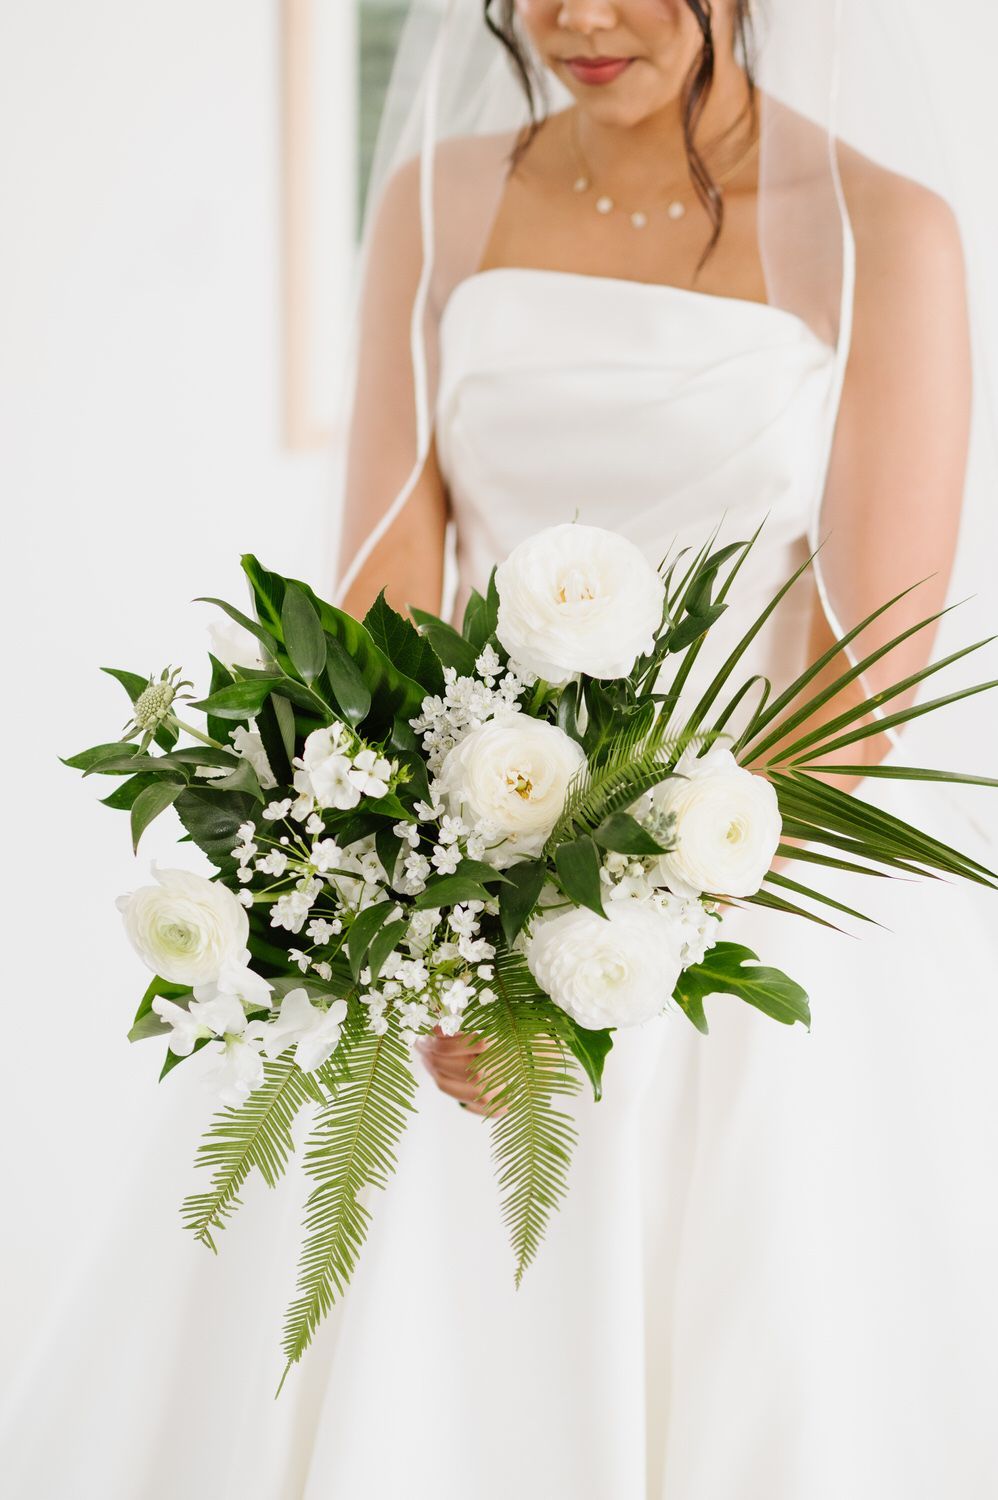 A bride in a white dress is holding a bouquet of white flowers.